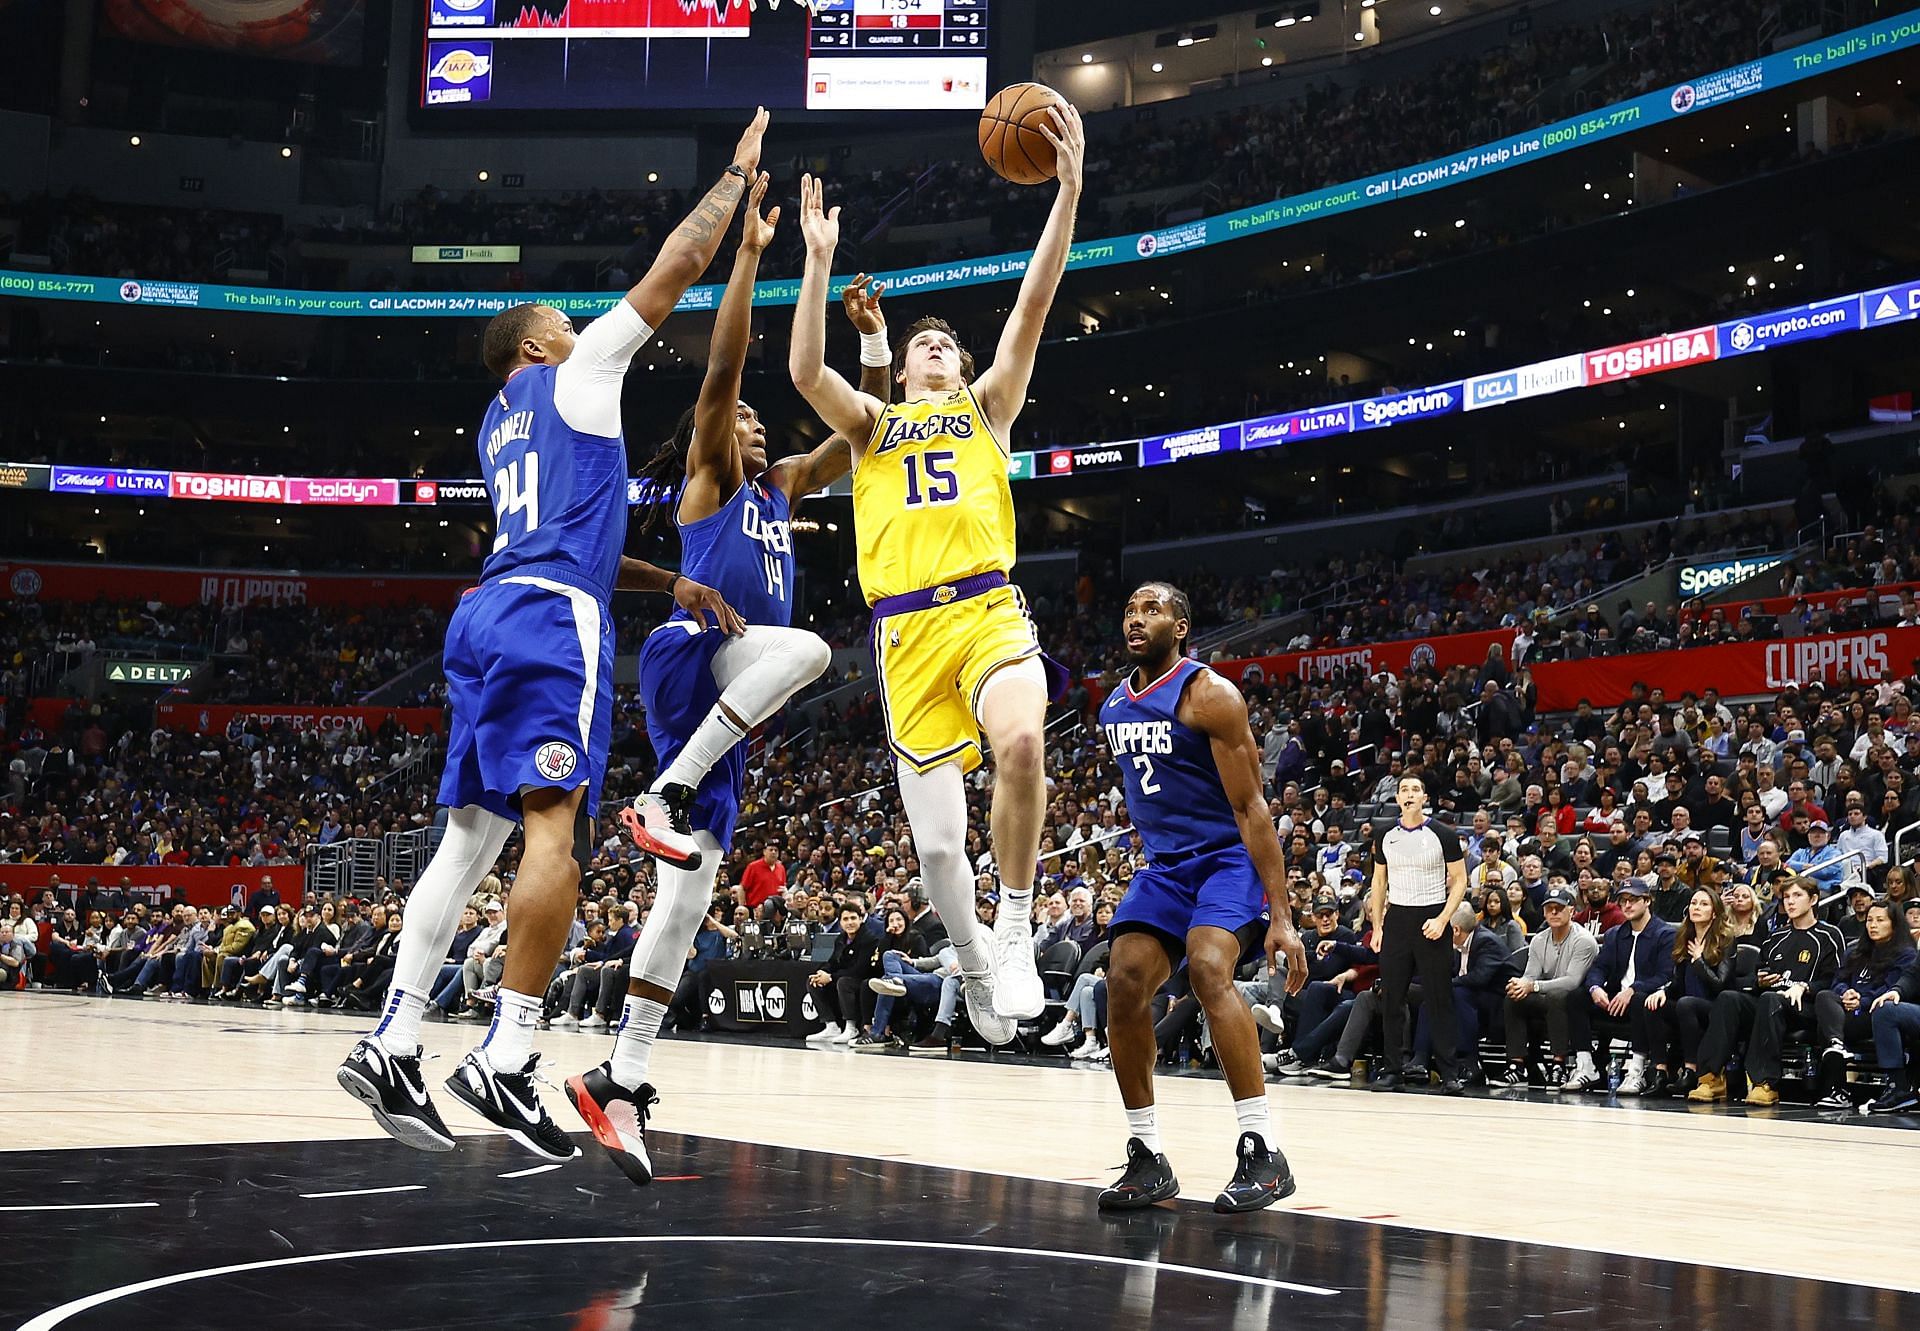 The Lakers beat the Clippers to win the season series 3-1.